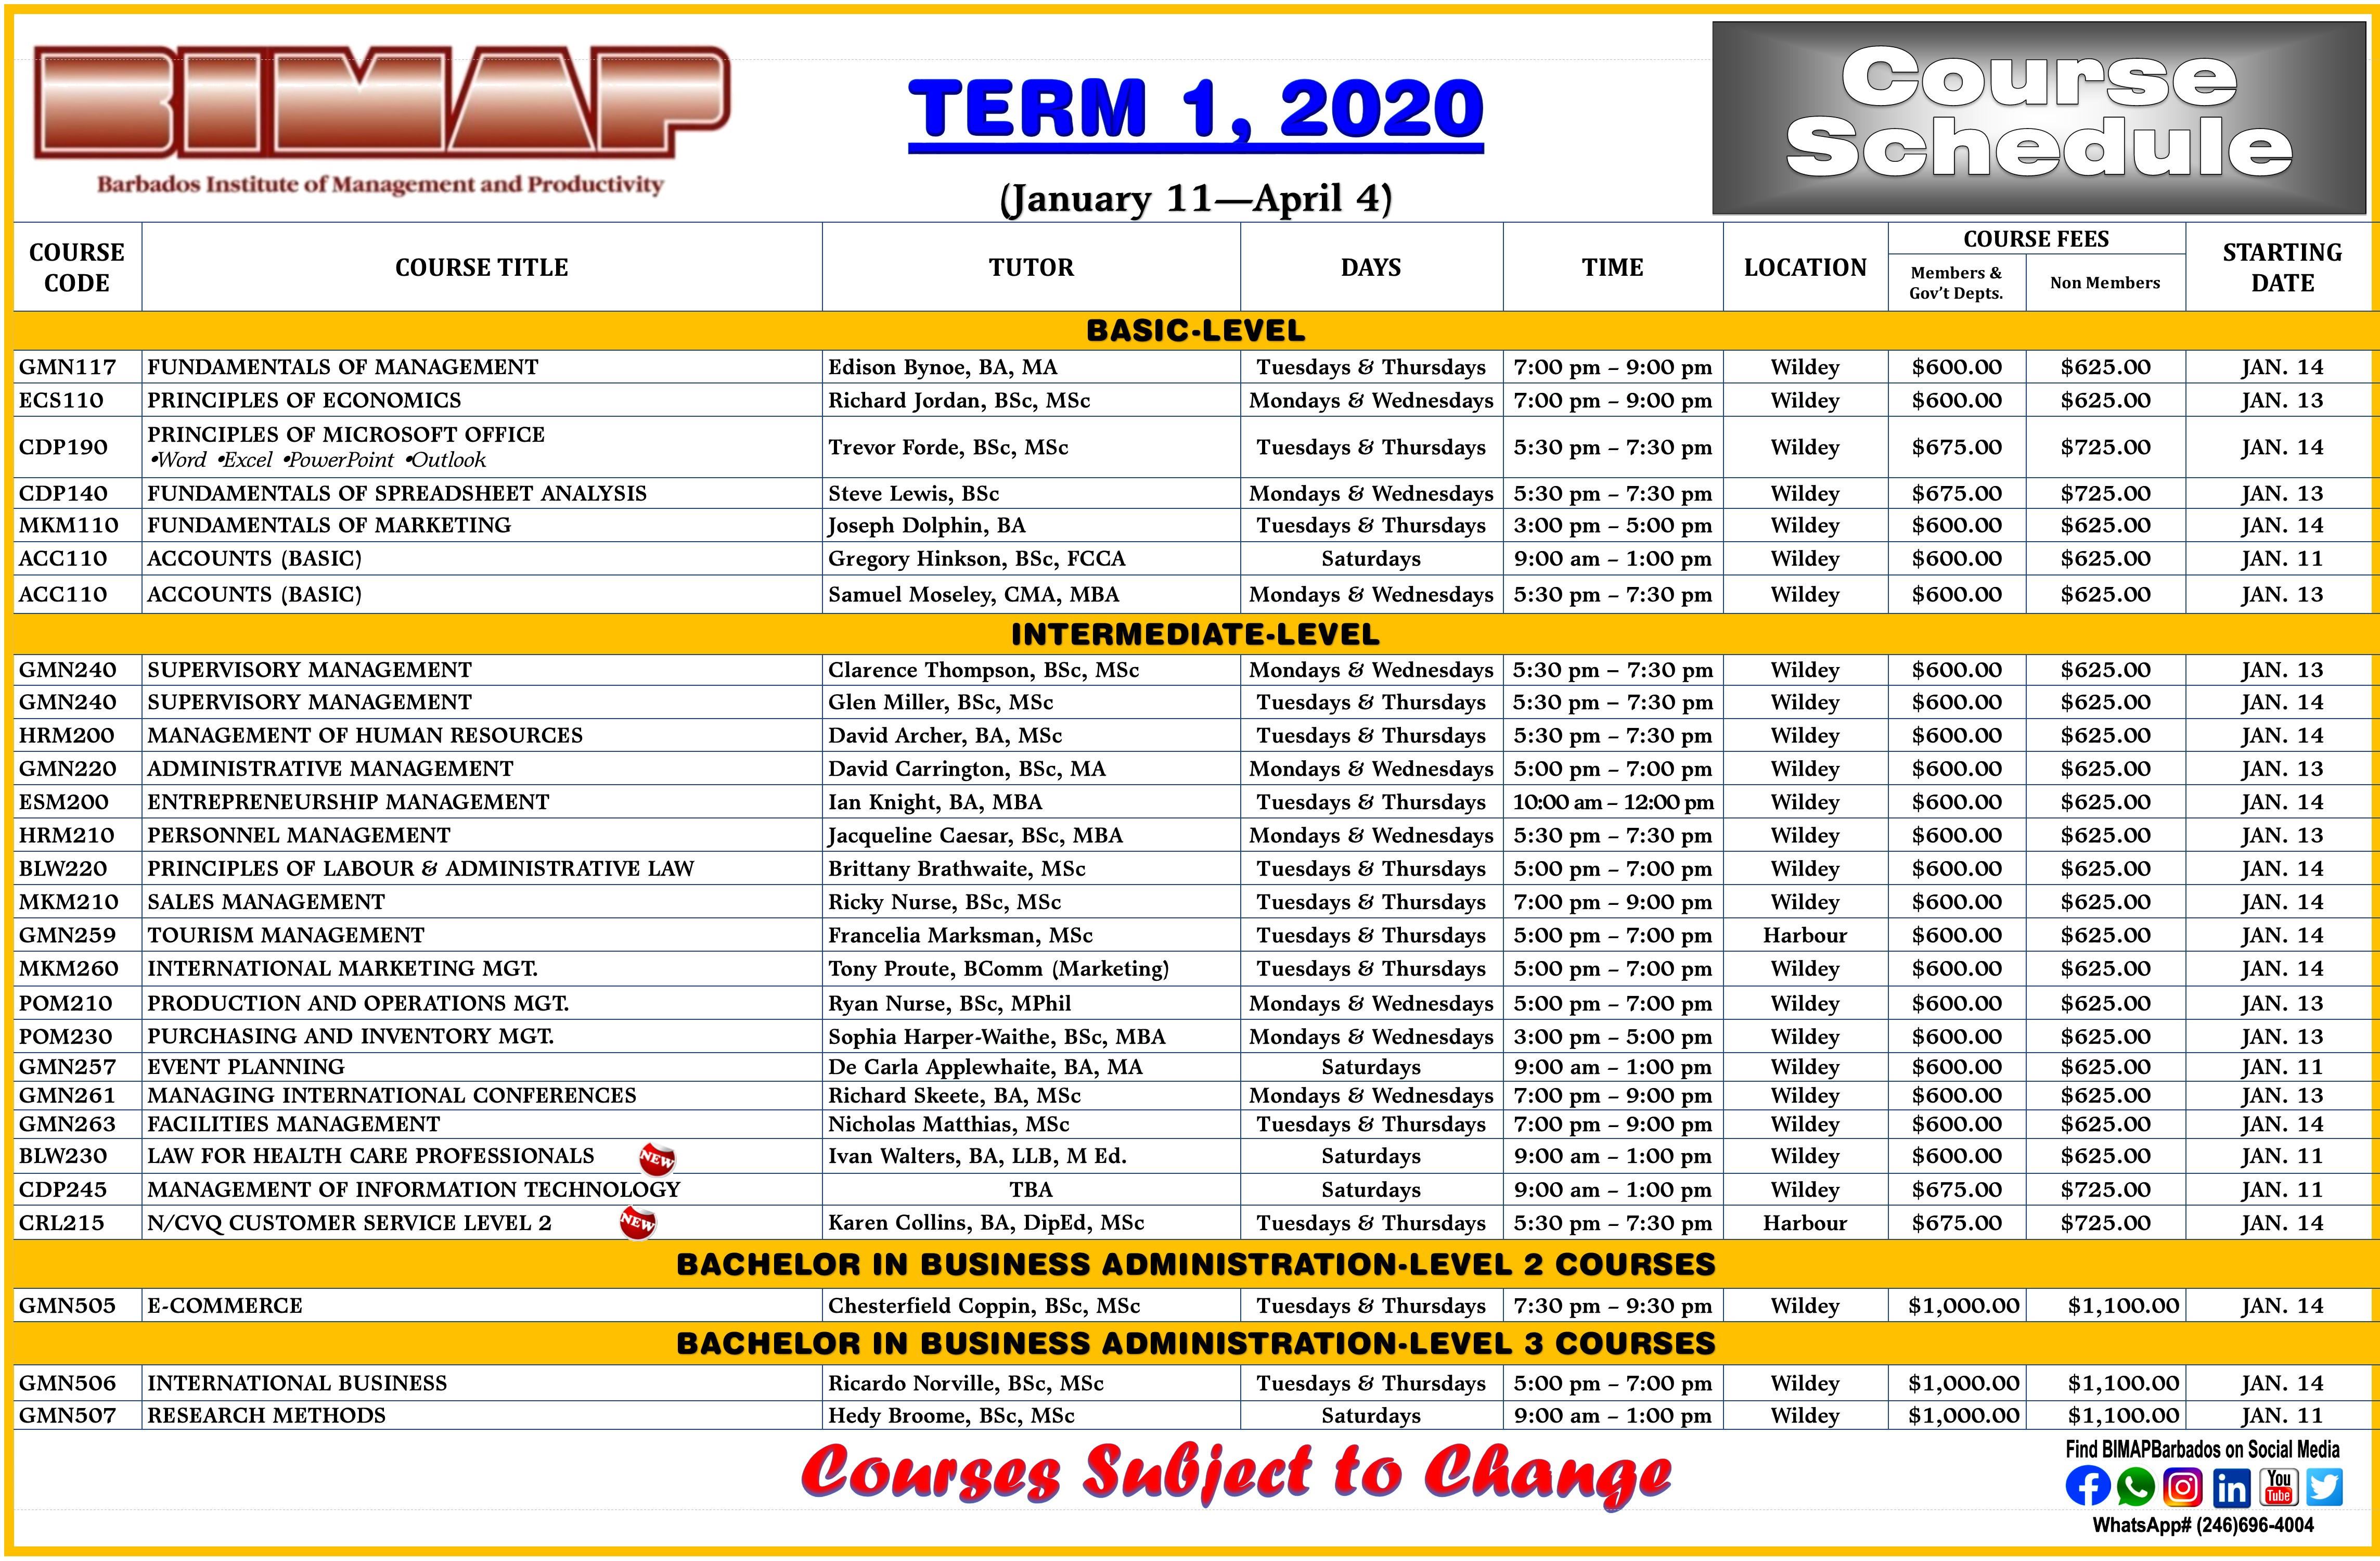 Course Schedule for Term 1, 2020